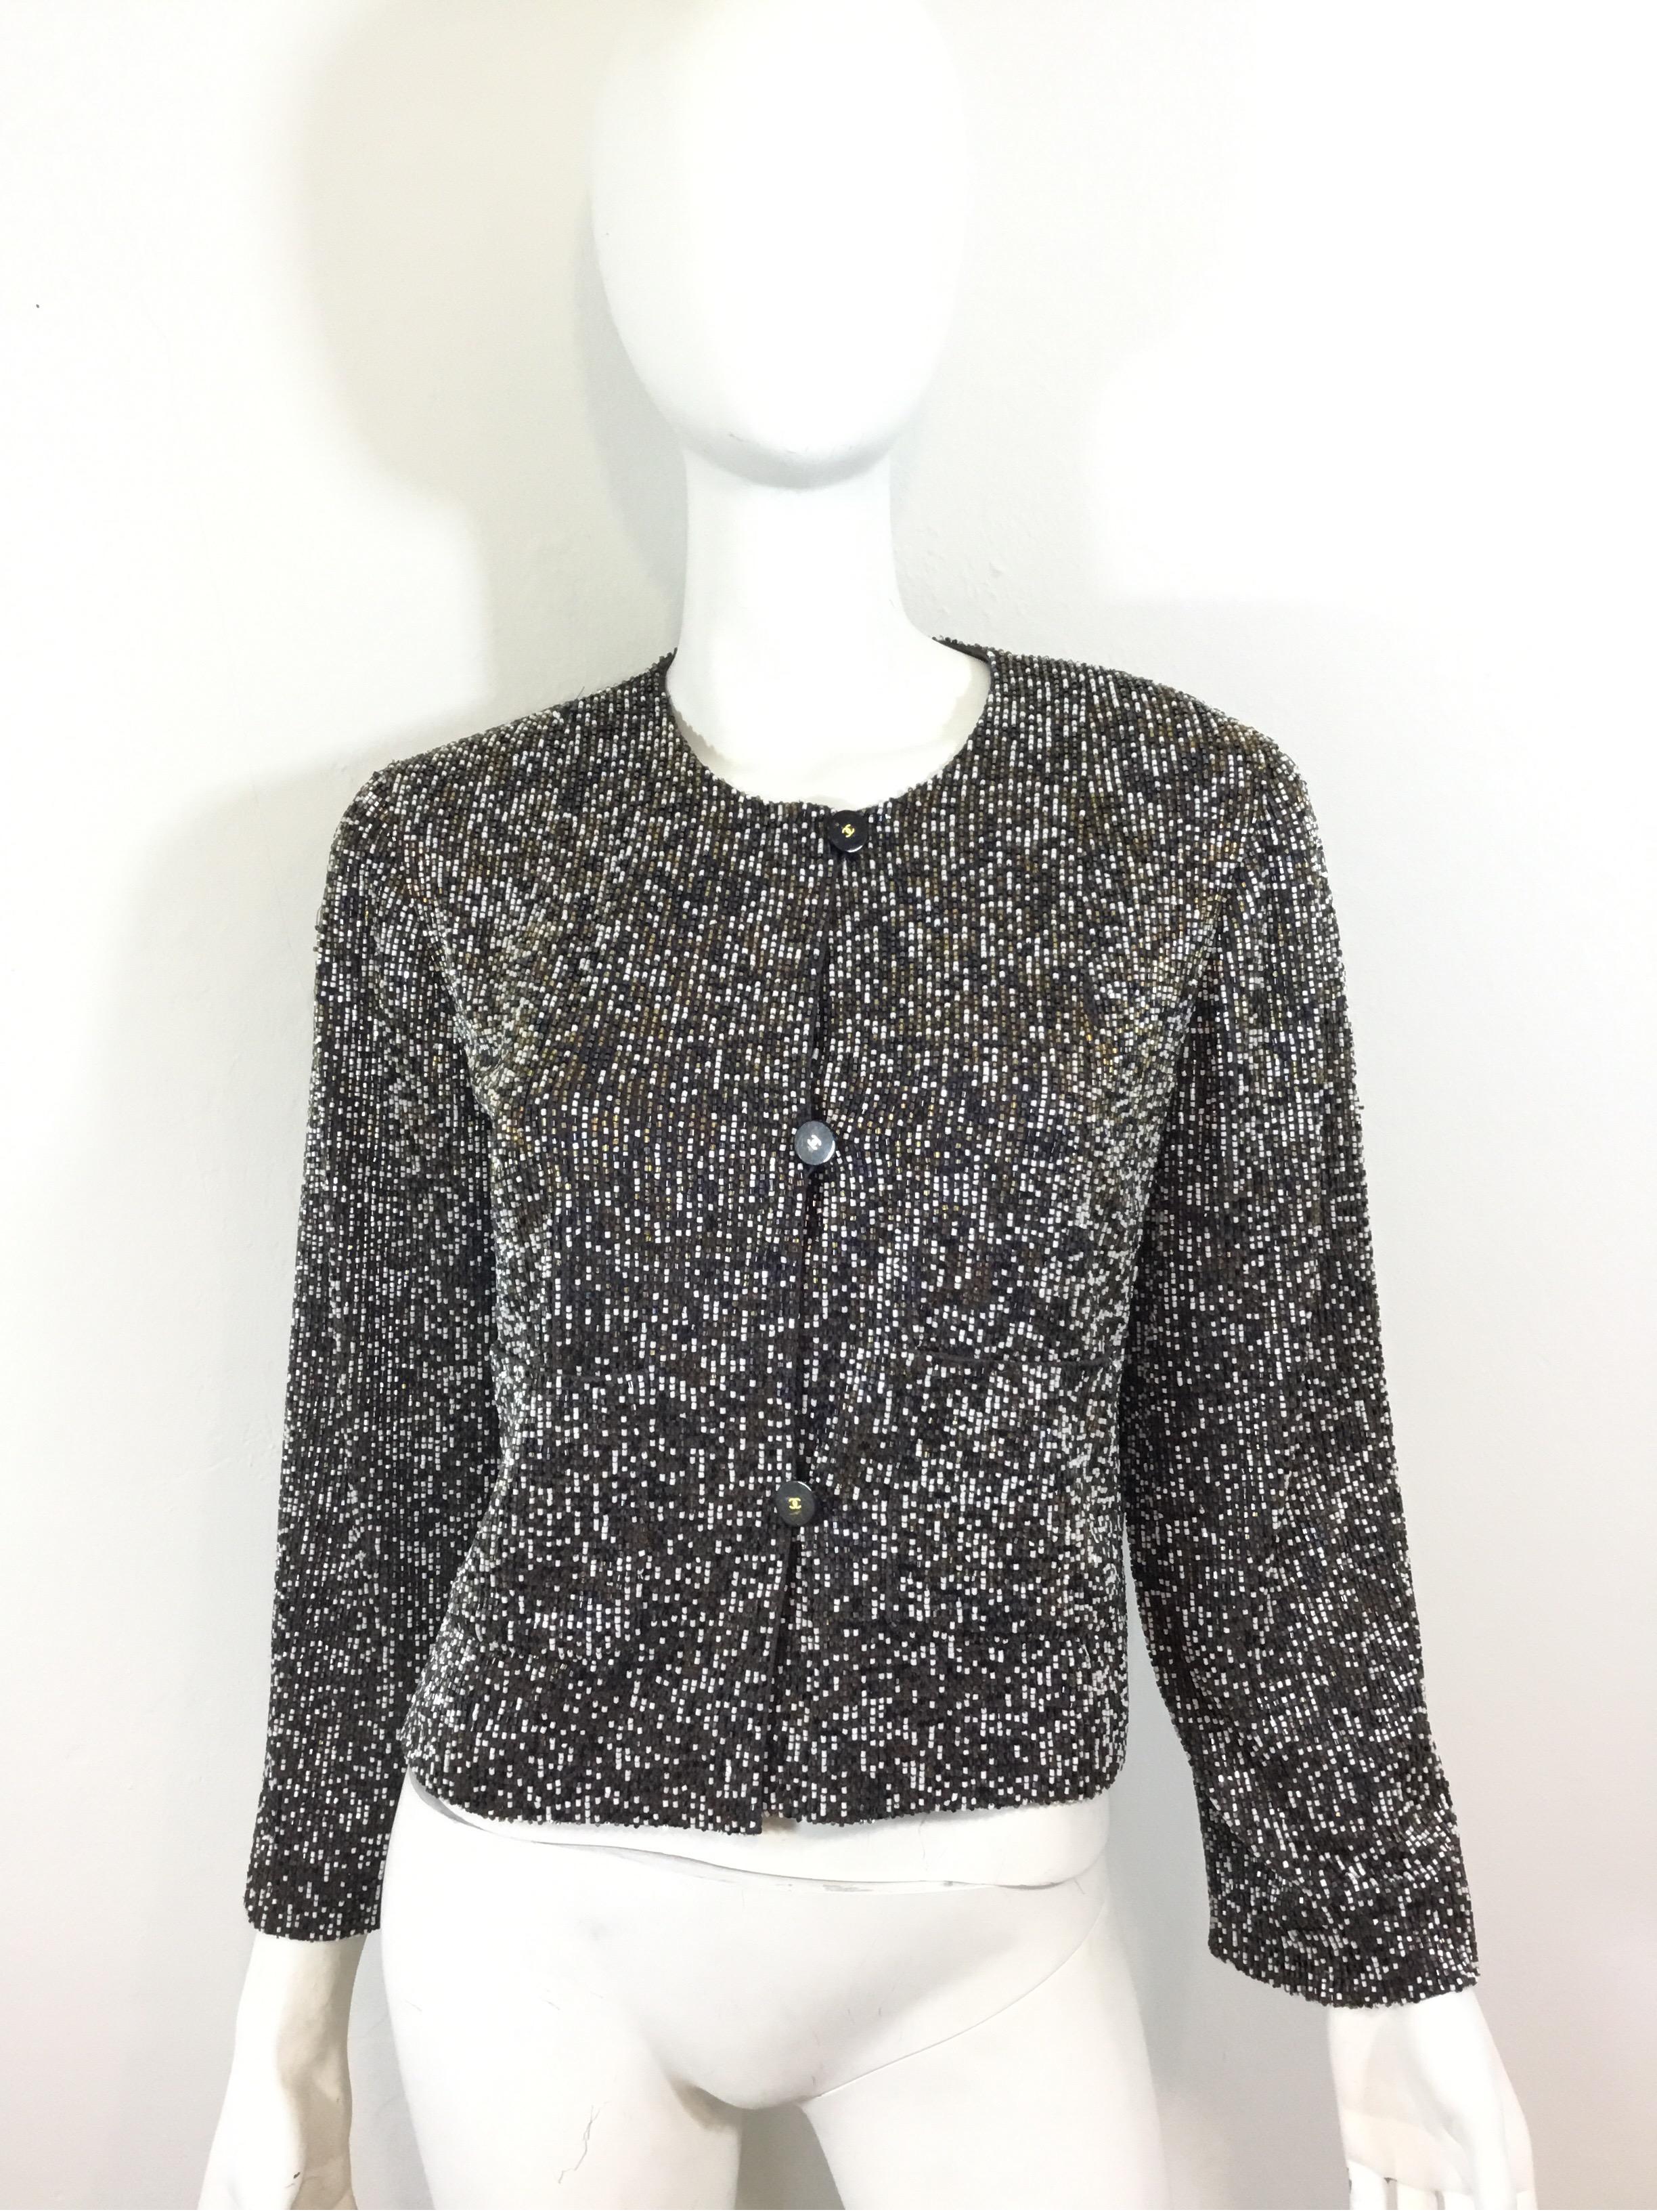 Chanel jacket is fully beaded with gold/bronze, blue, and white colored beads, button closures and two uncut pockets at the waist. Jacket is labeled a size 40, made in France.

Bust 40”, sleeves 22”, shoulder to shoulder 17”, length 20”